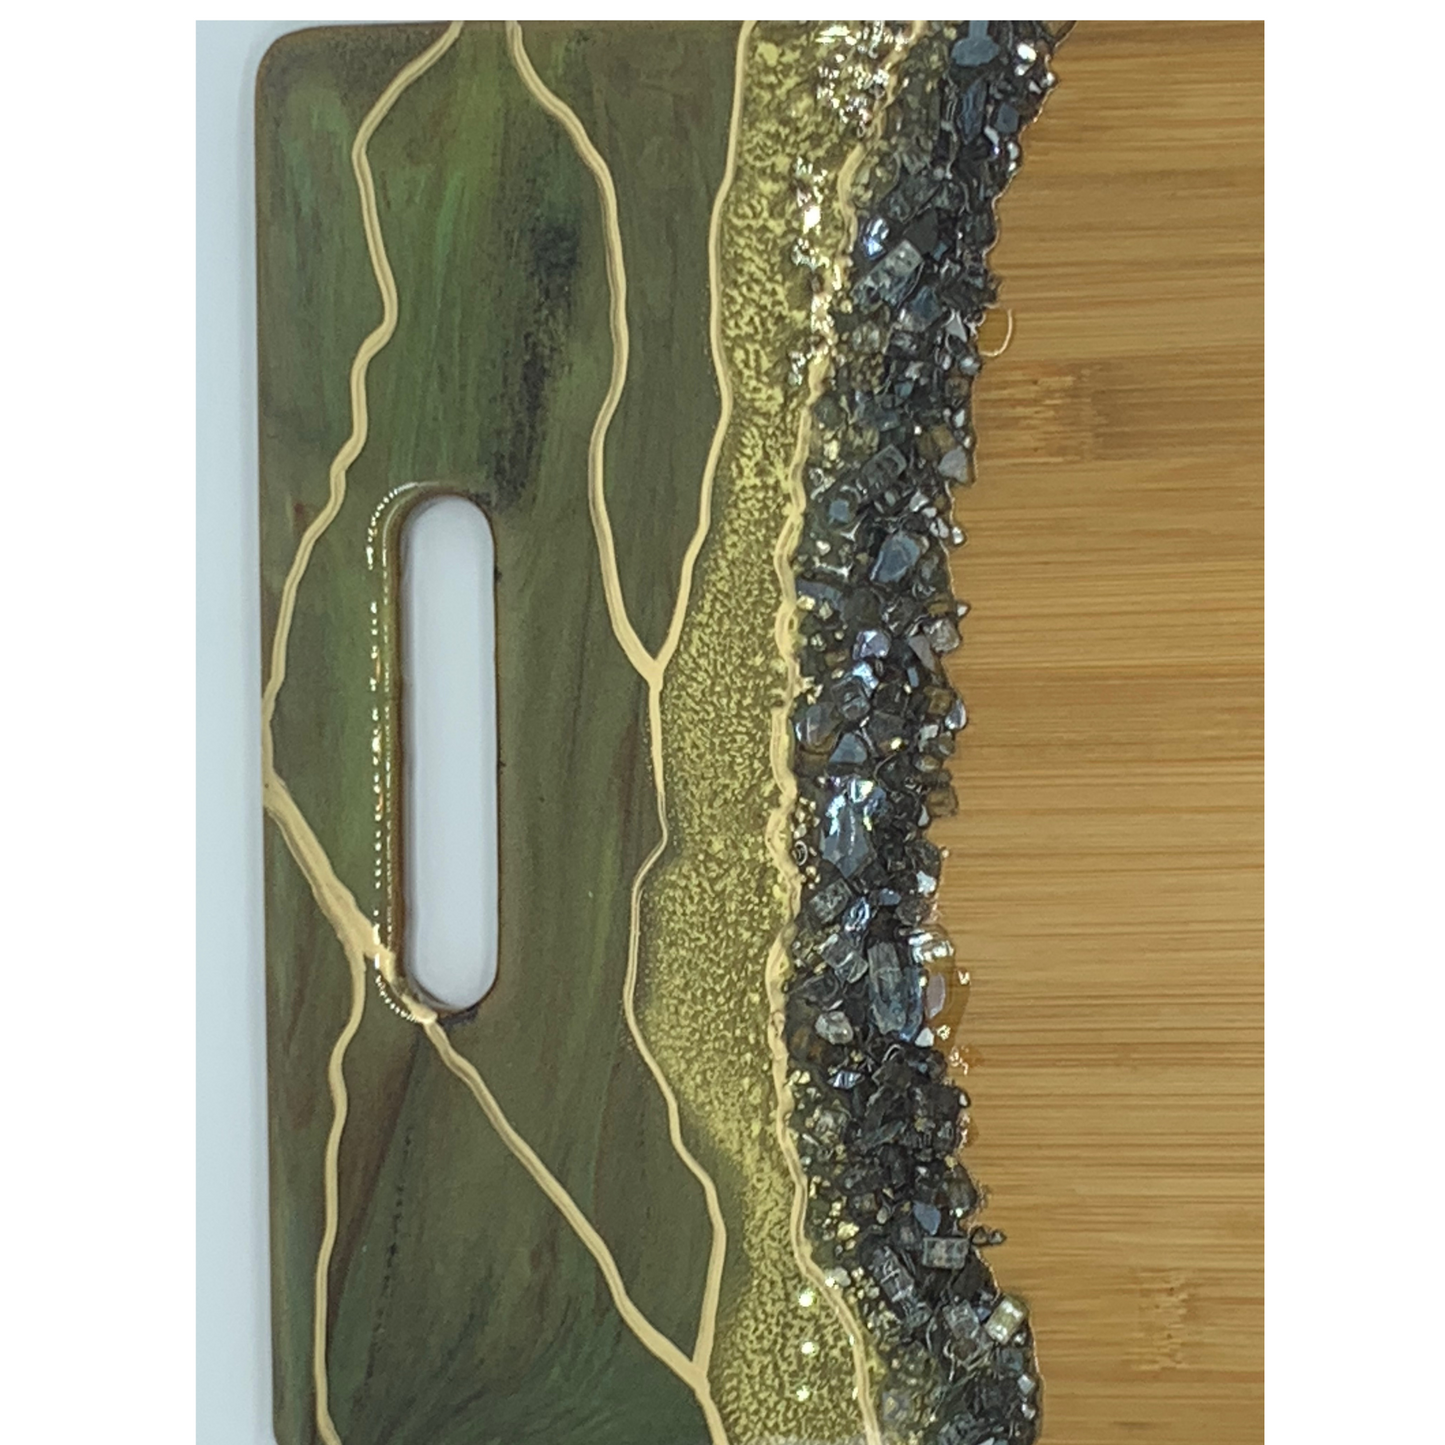 "Bling Me Up" Gorgeous Modern Resin Charcuterie Board Cutting Board Functional Art